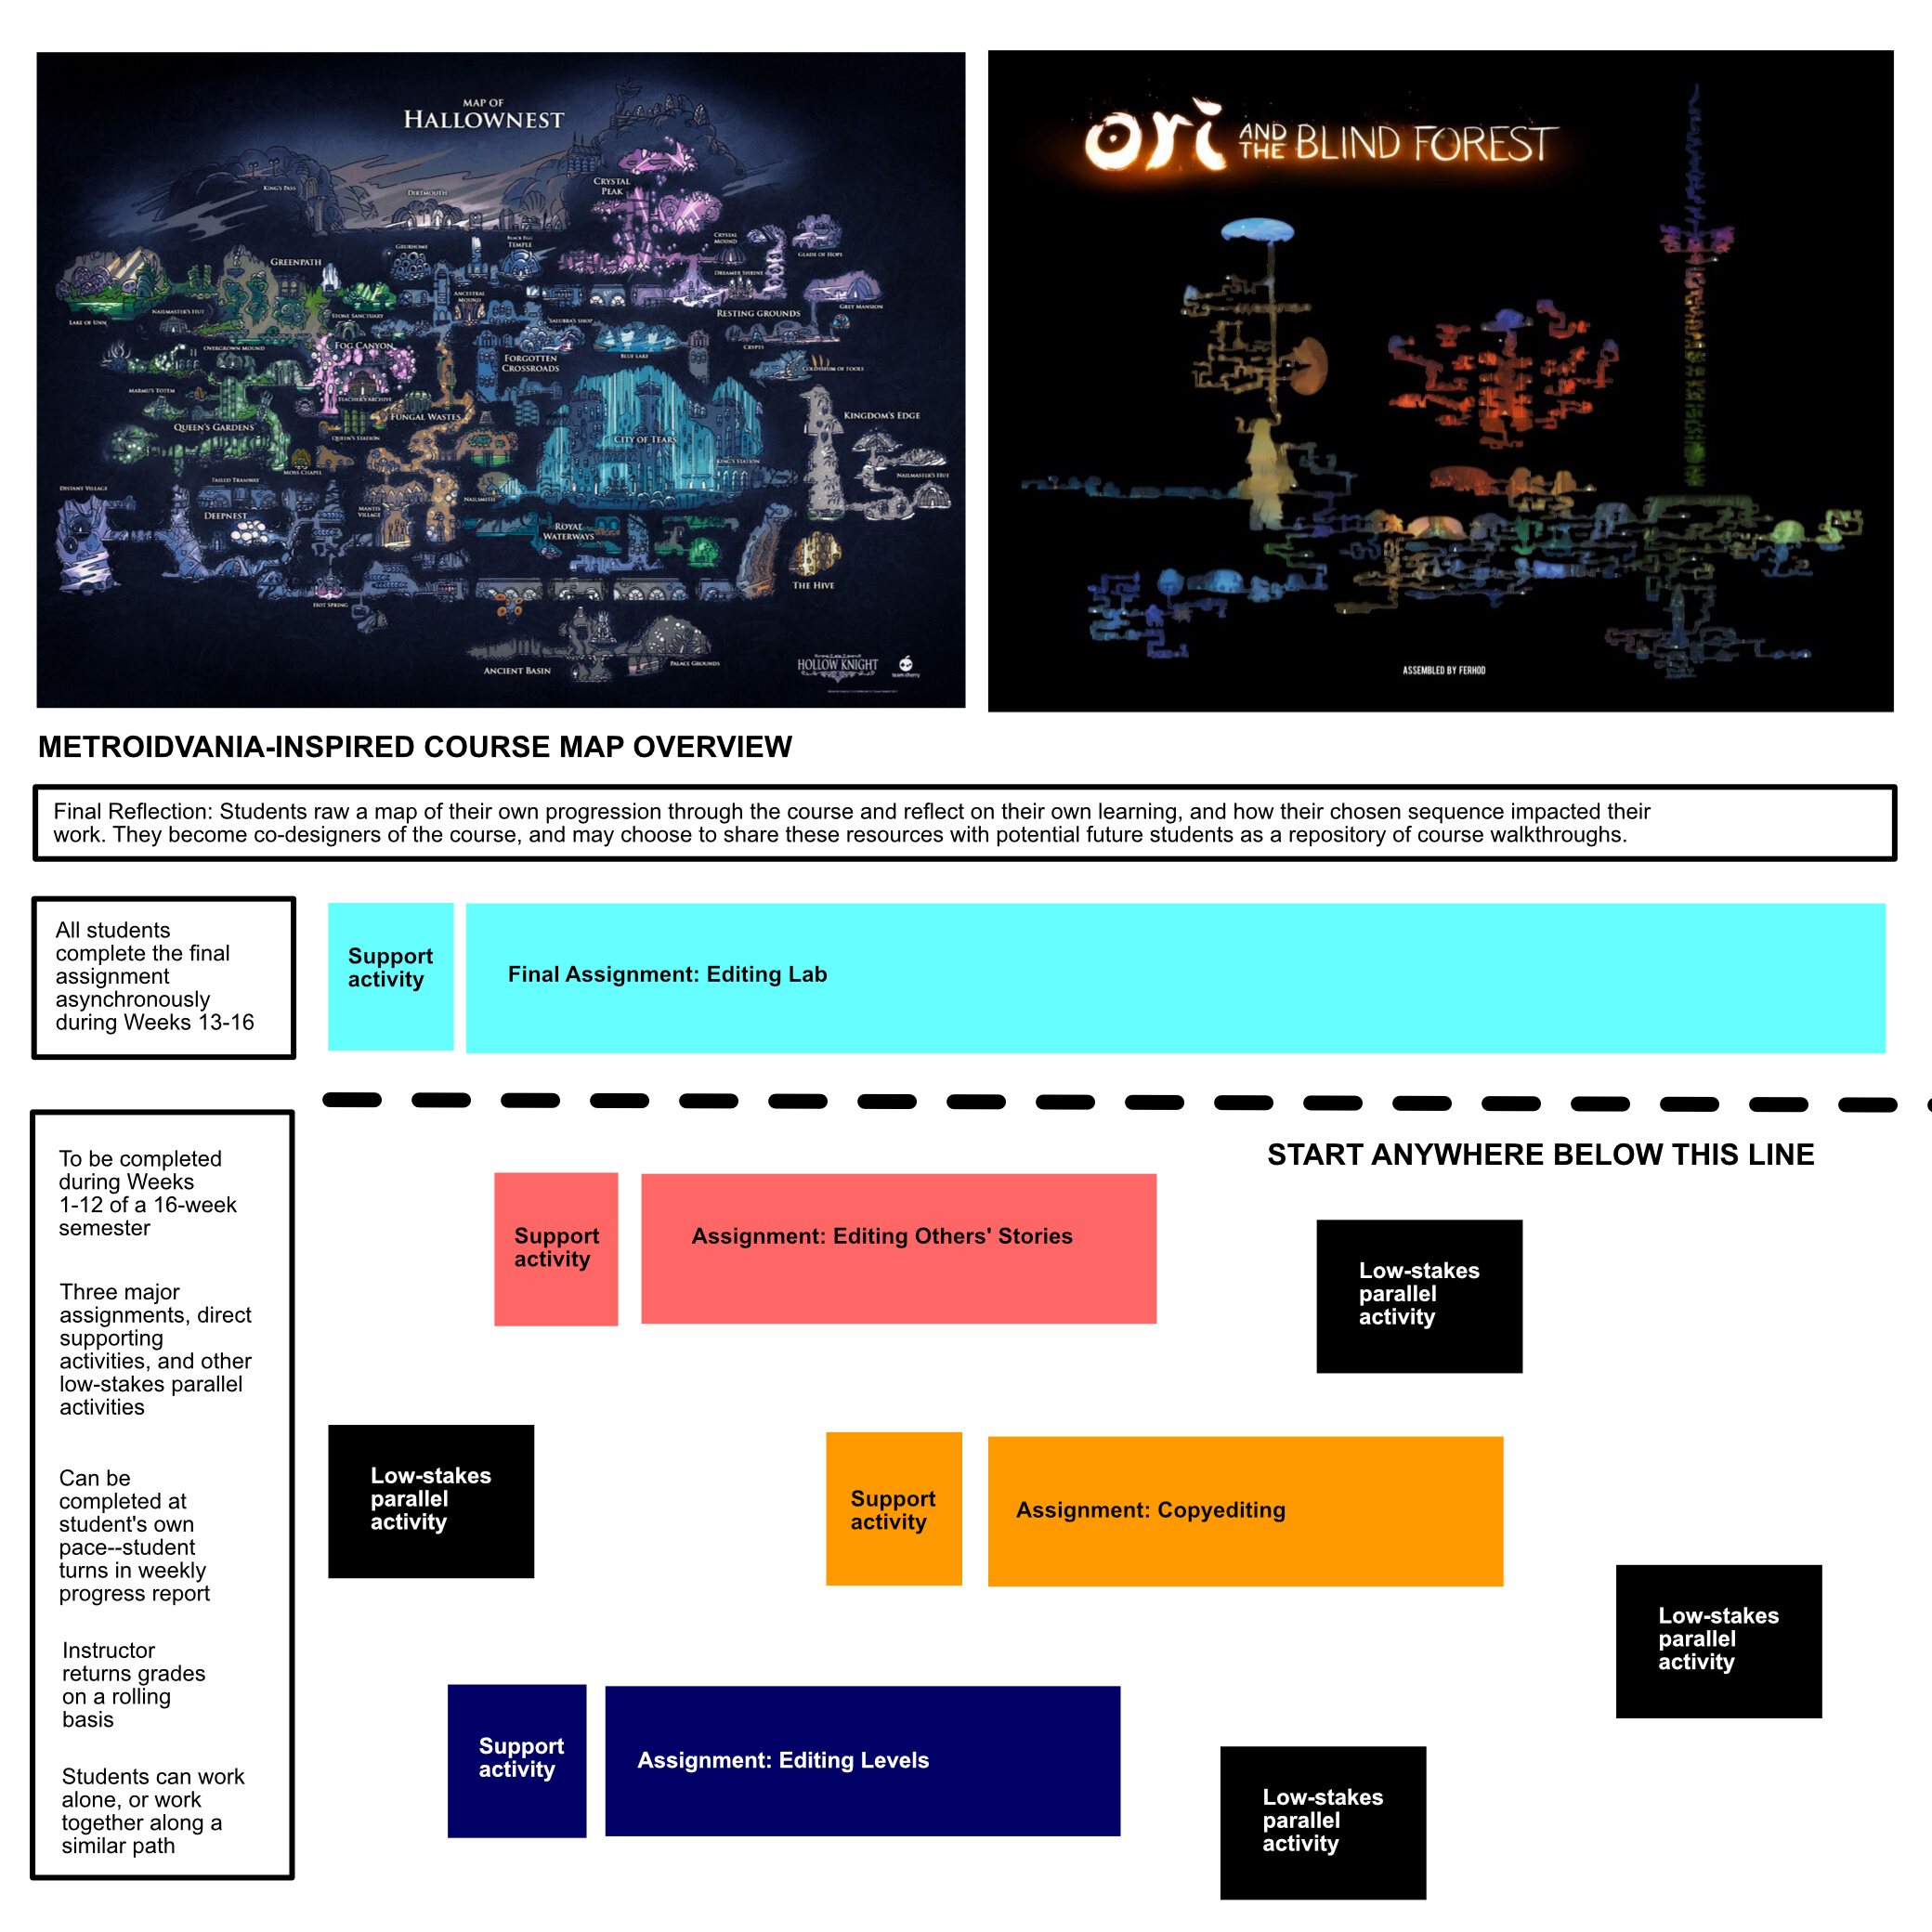 metroidvania-style course map for an undergraduate professional editing course, featuring four assignments with flexible completion timelines